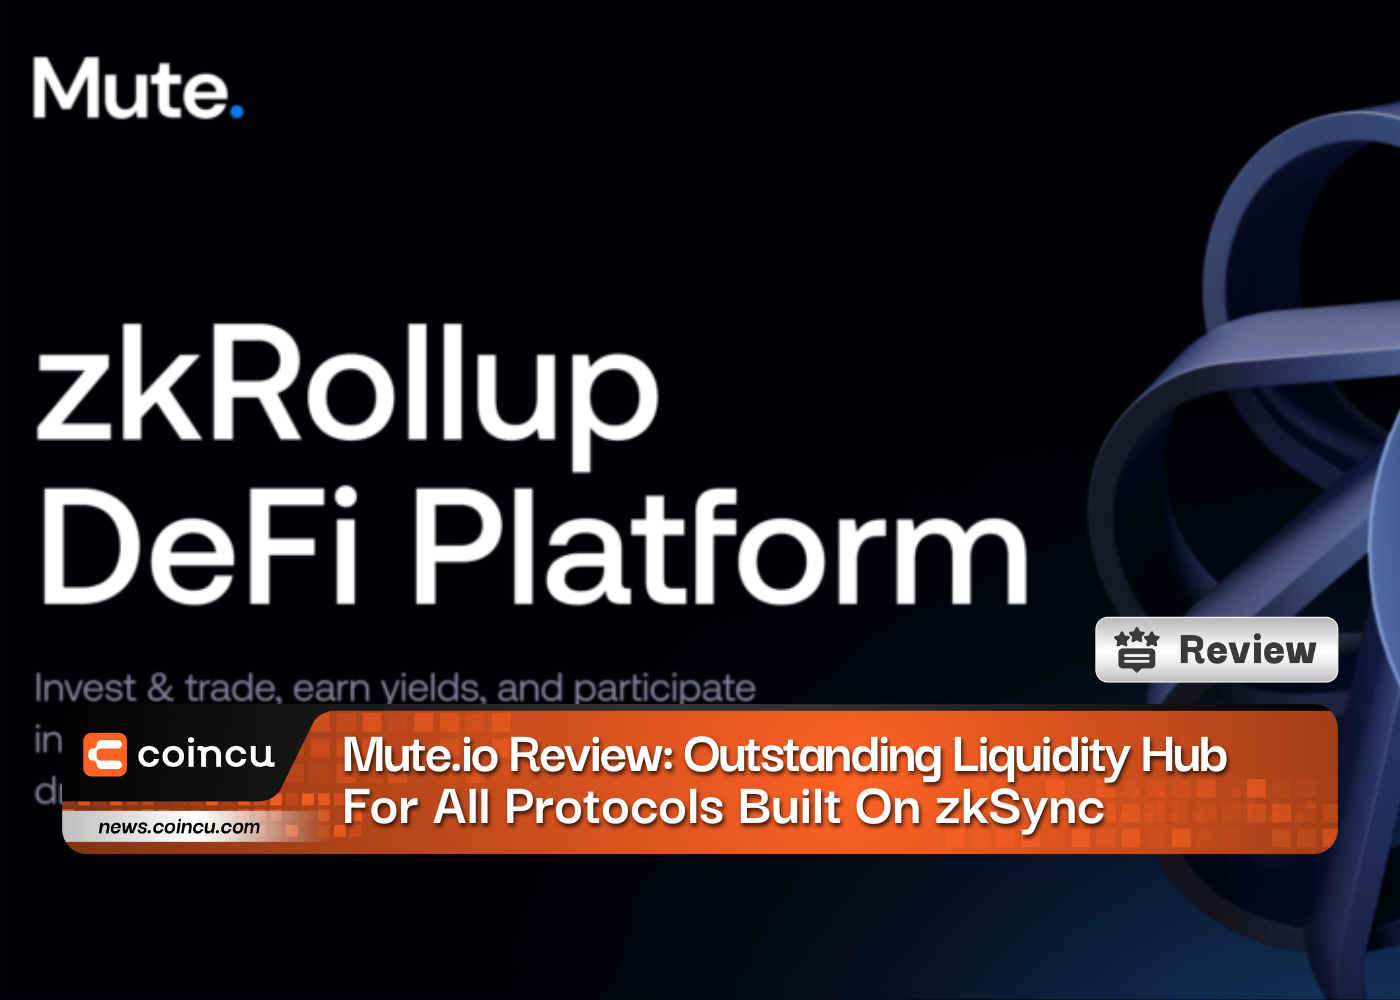 Mute.io Review: Outstanding Liquidity Hub For All Protocols Built On zkSync